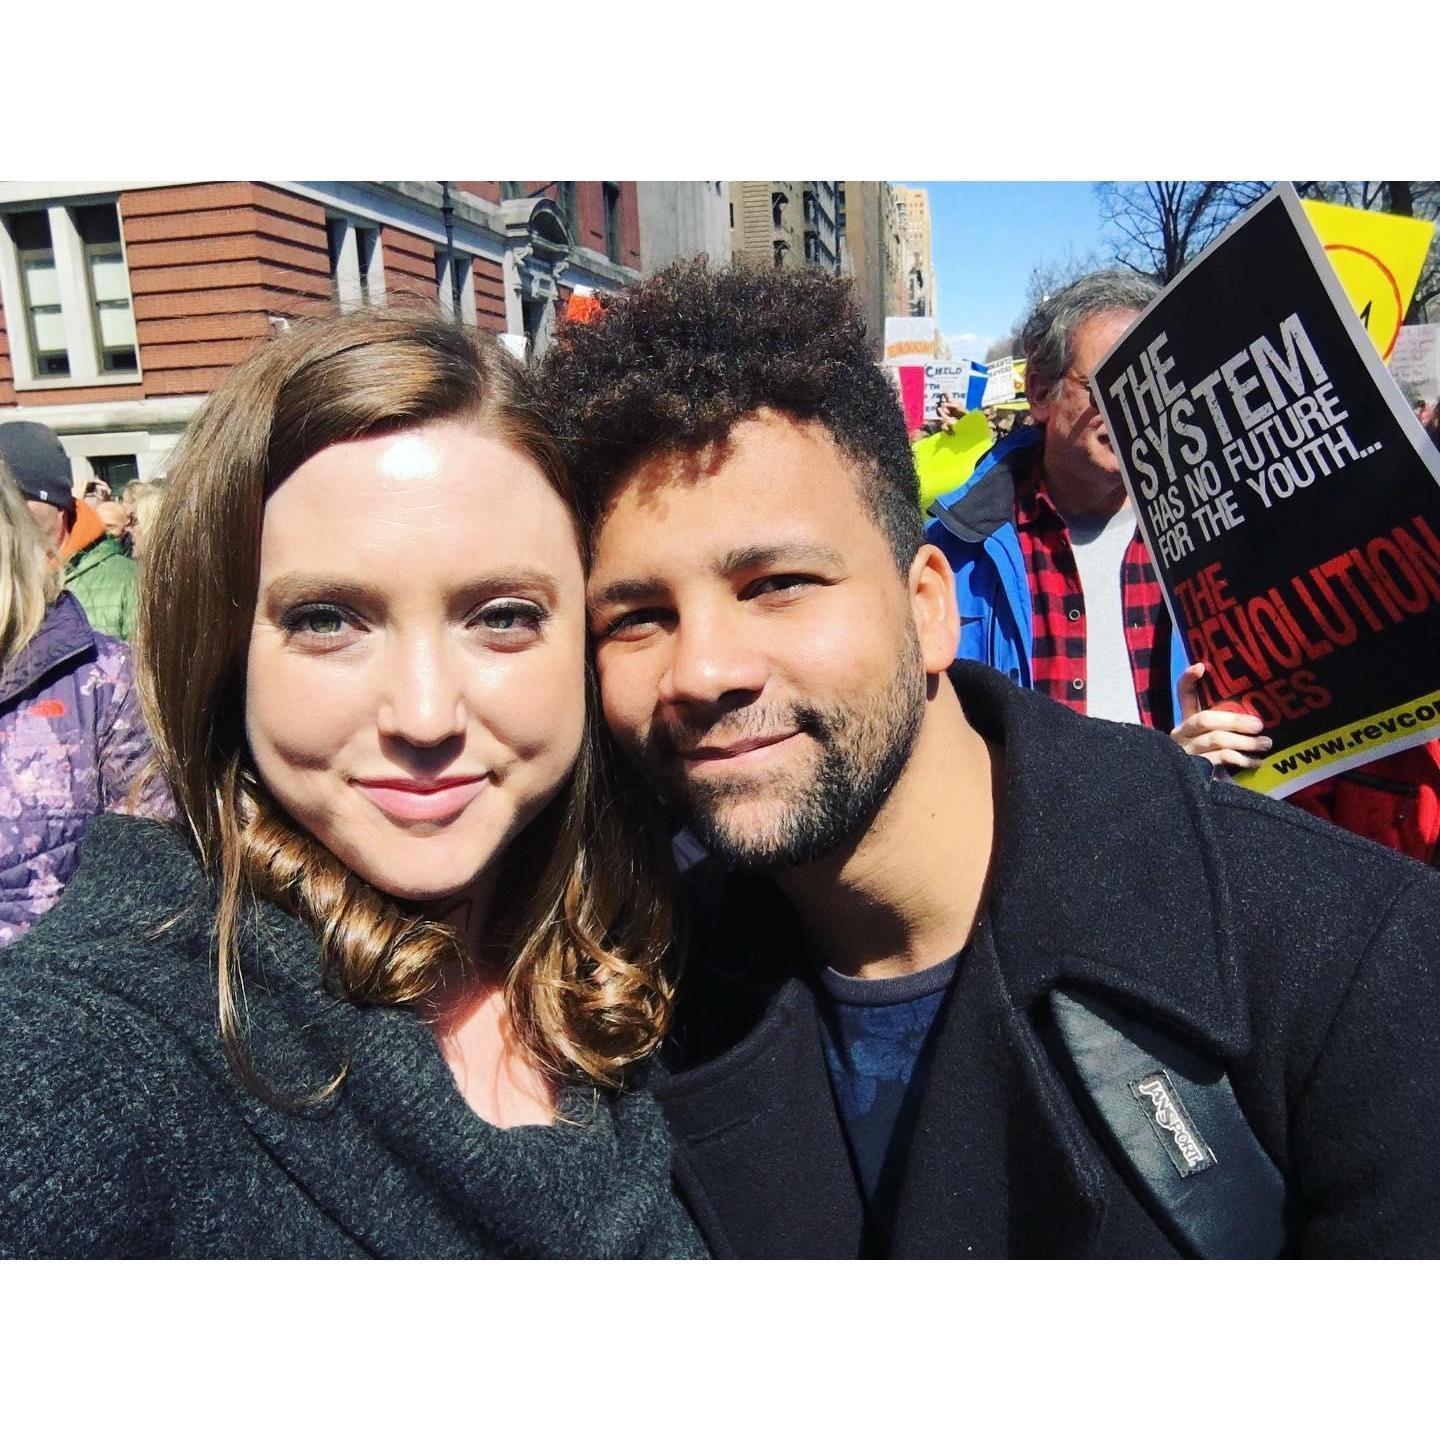 First selfie together at March for Our Lives